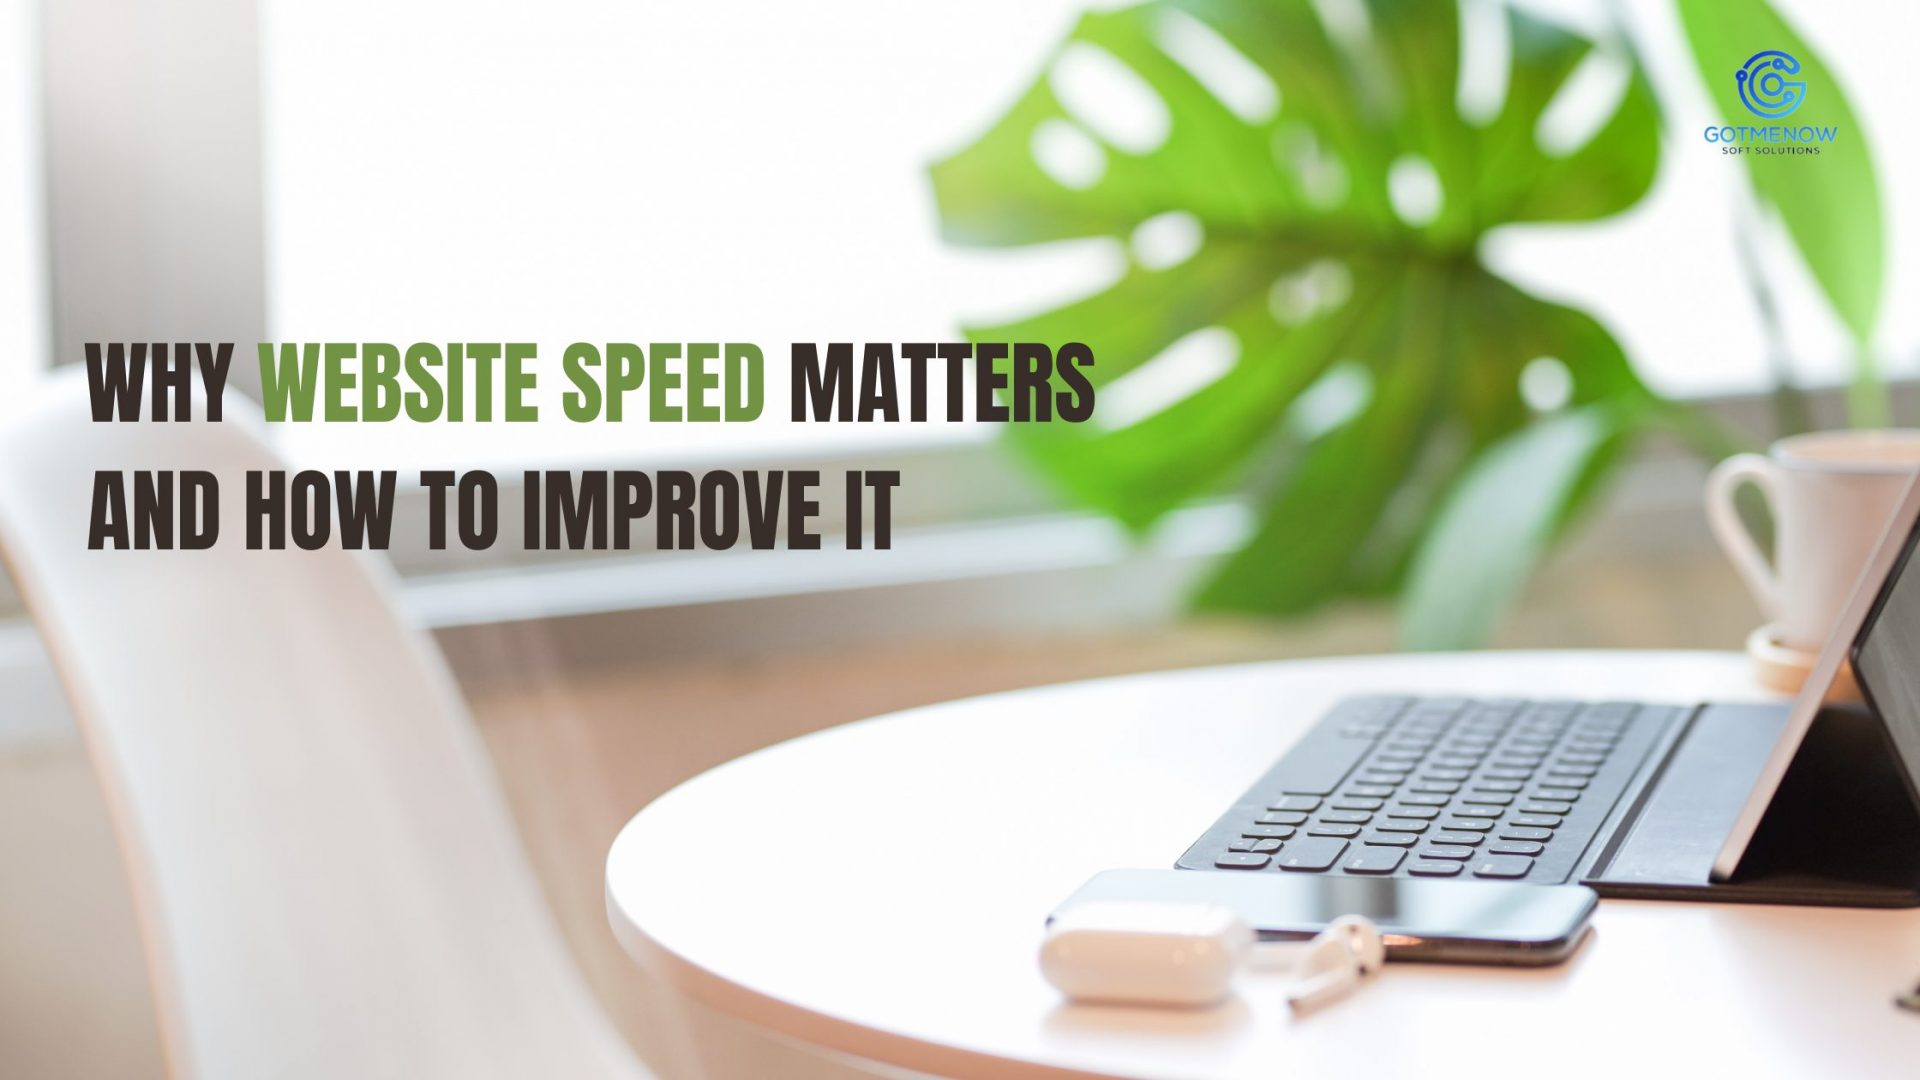 Why Website Speed Matters And How to Improve It